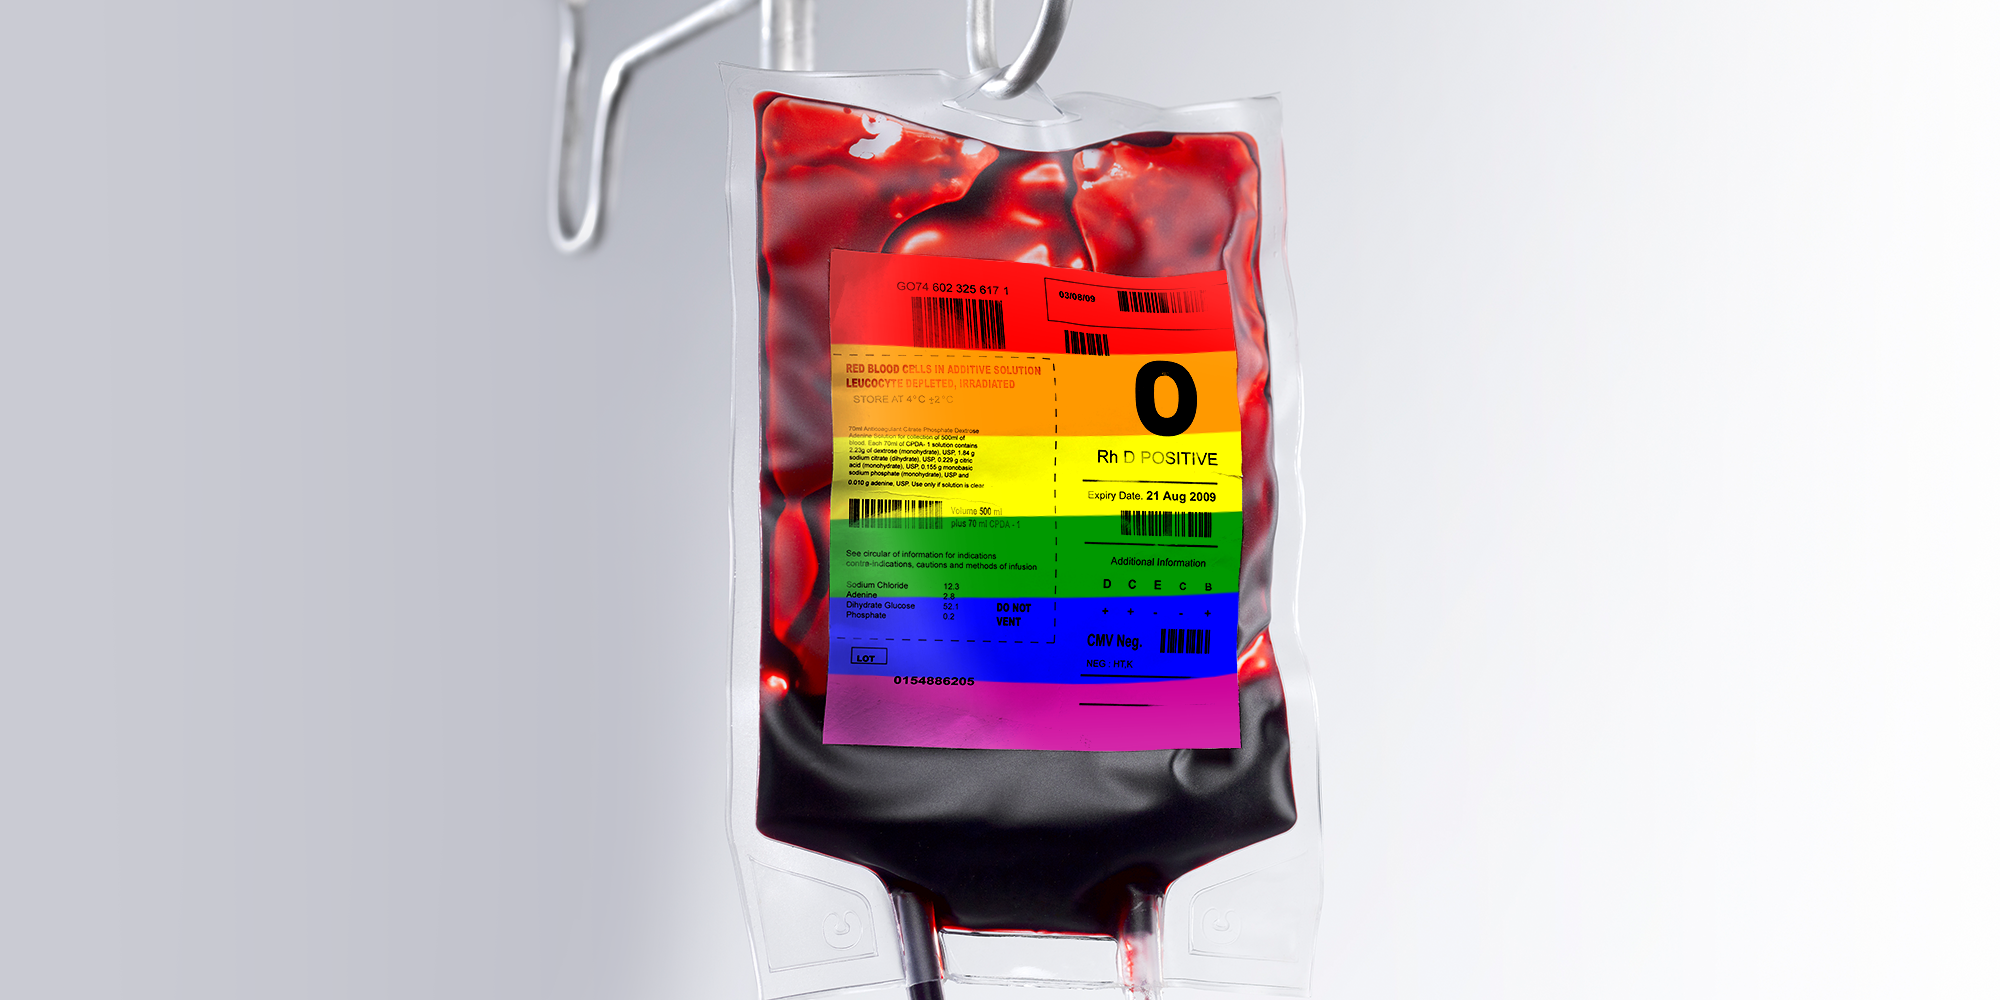 can gay men donate blood now